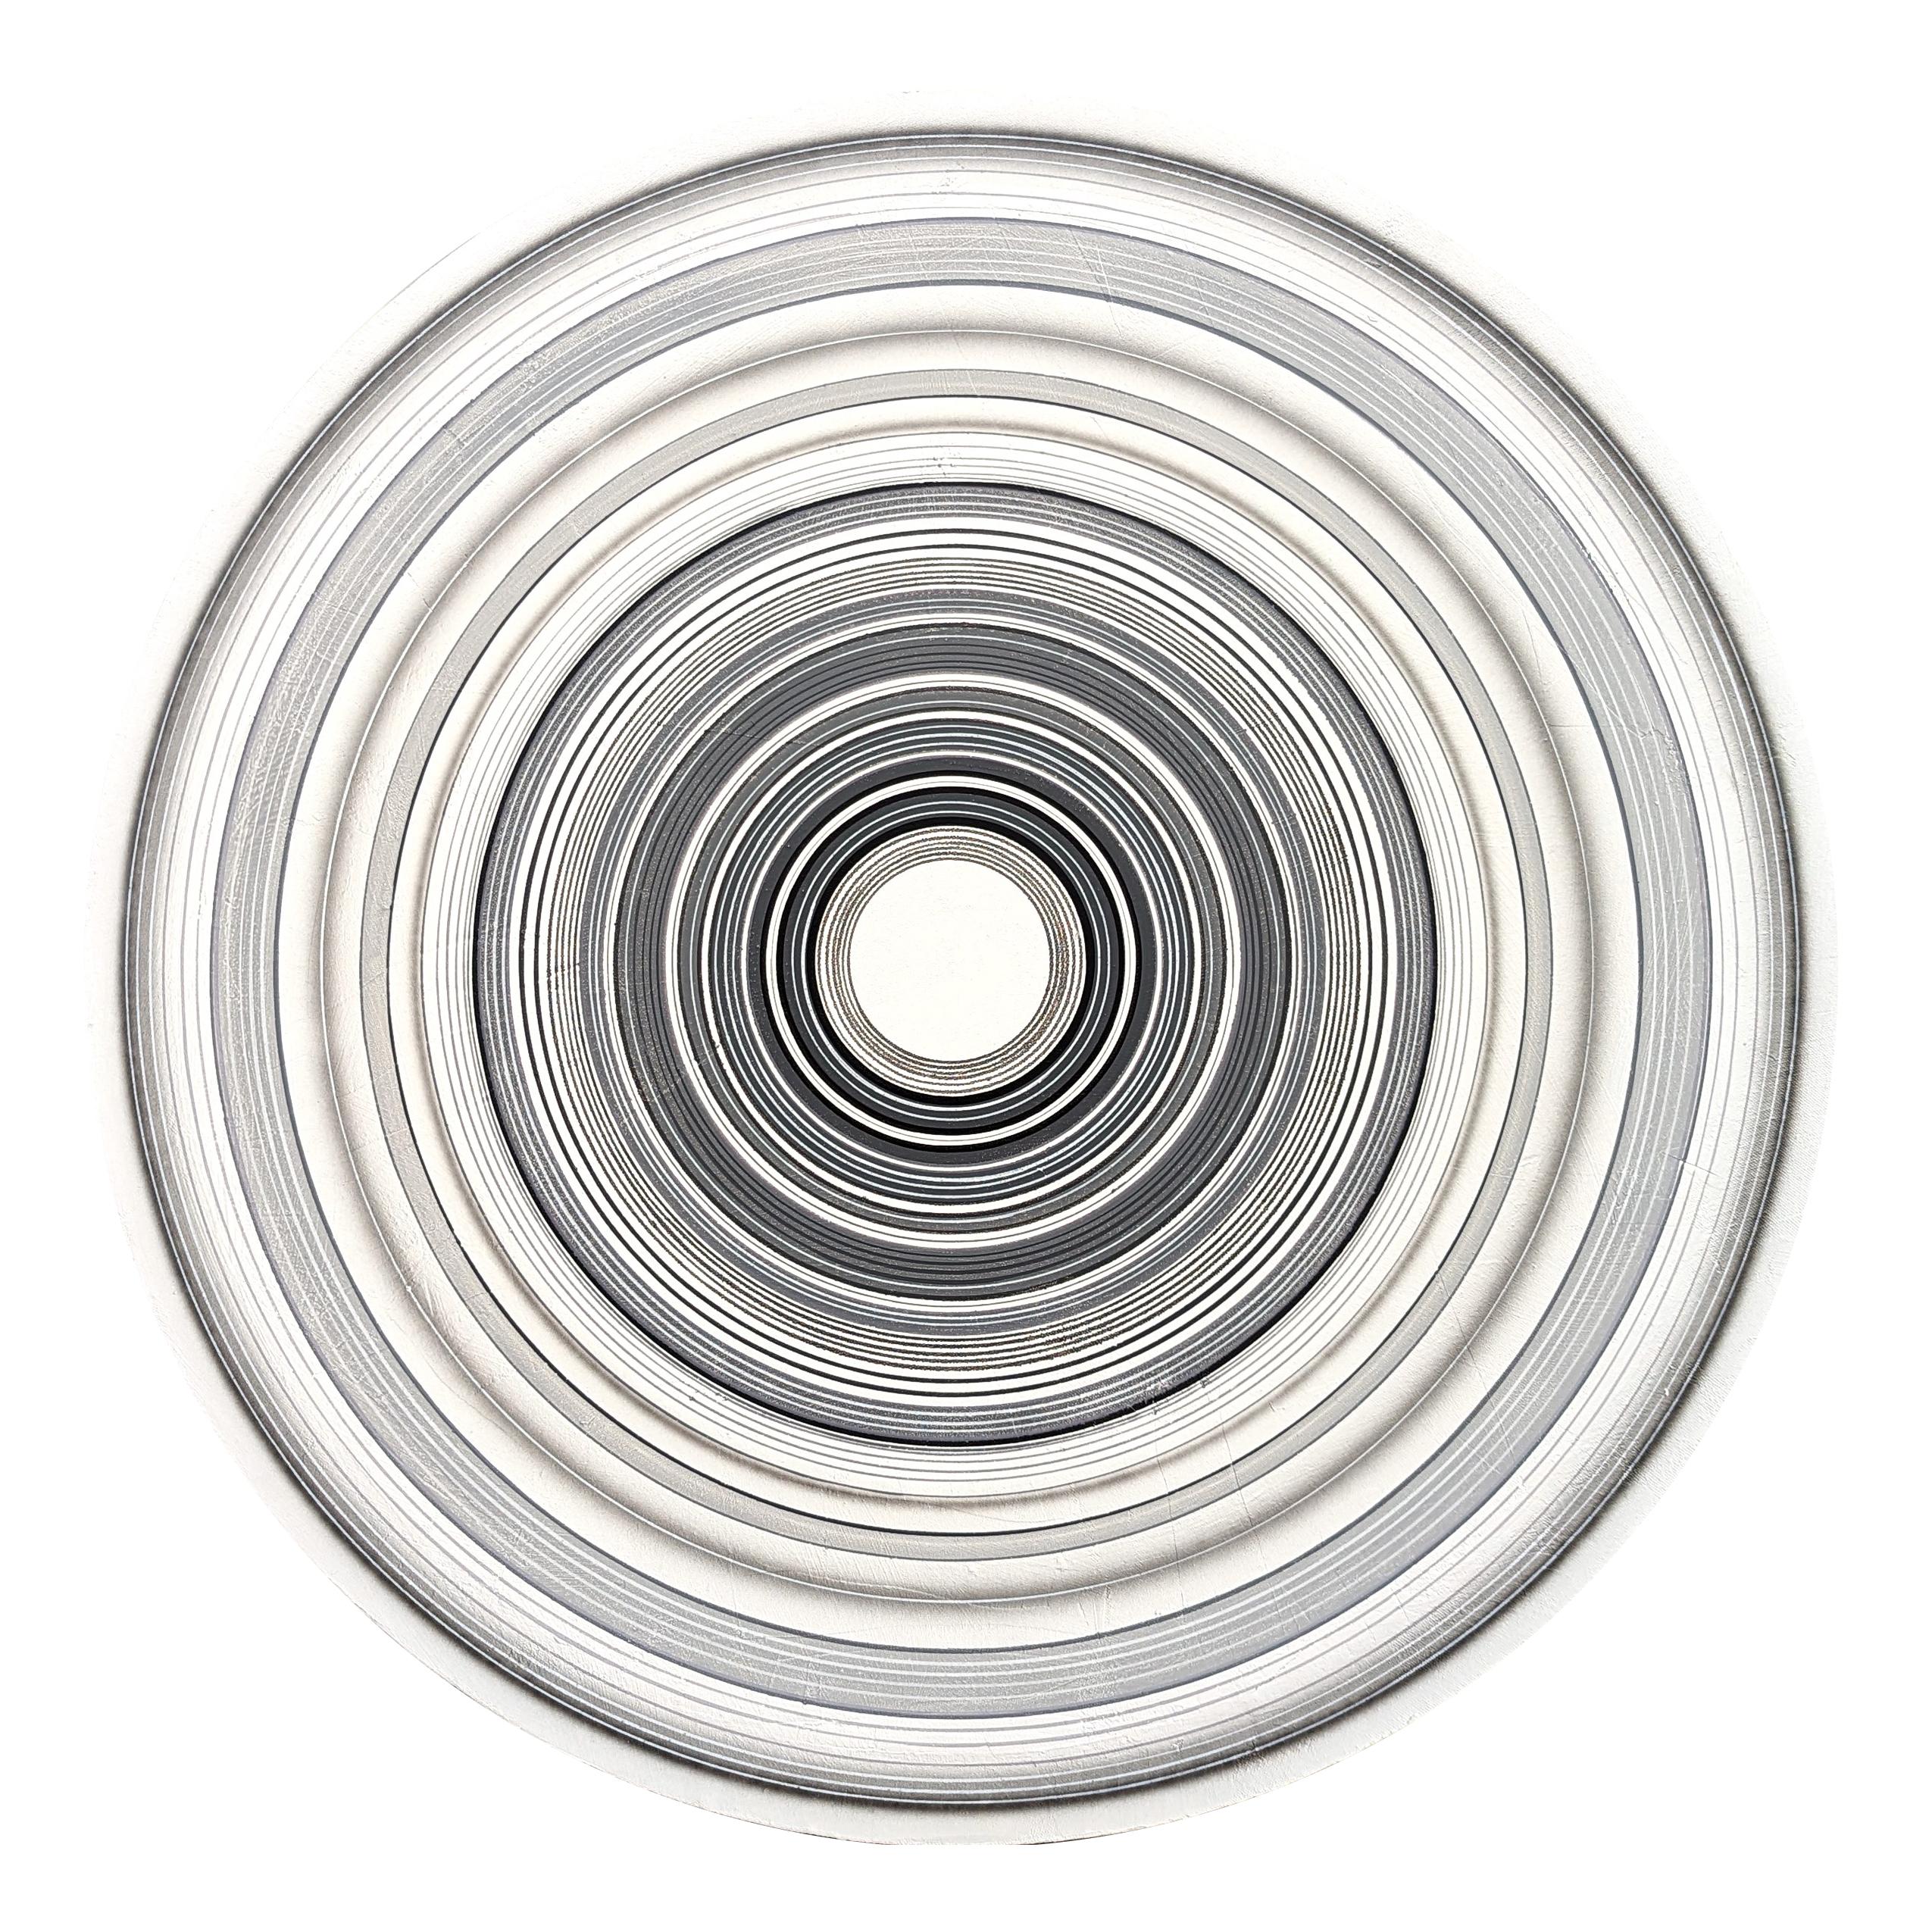 "Kool Thing" Contemporary Abstract Gray and White Concentric Circle Painting